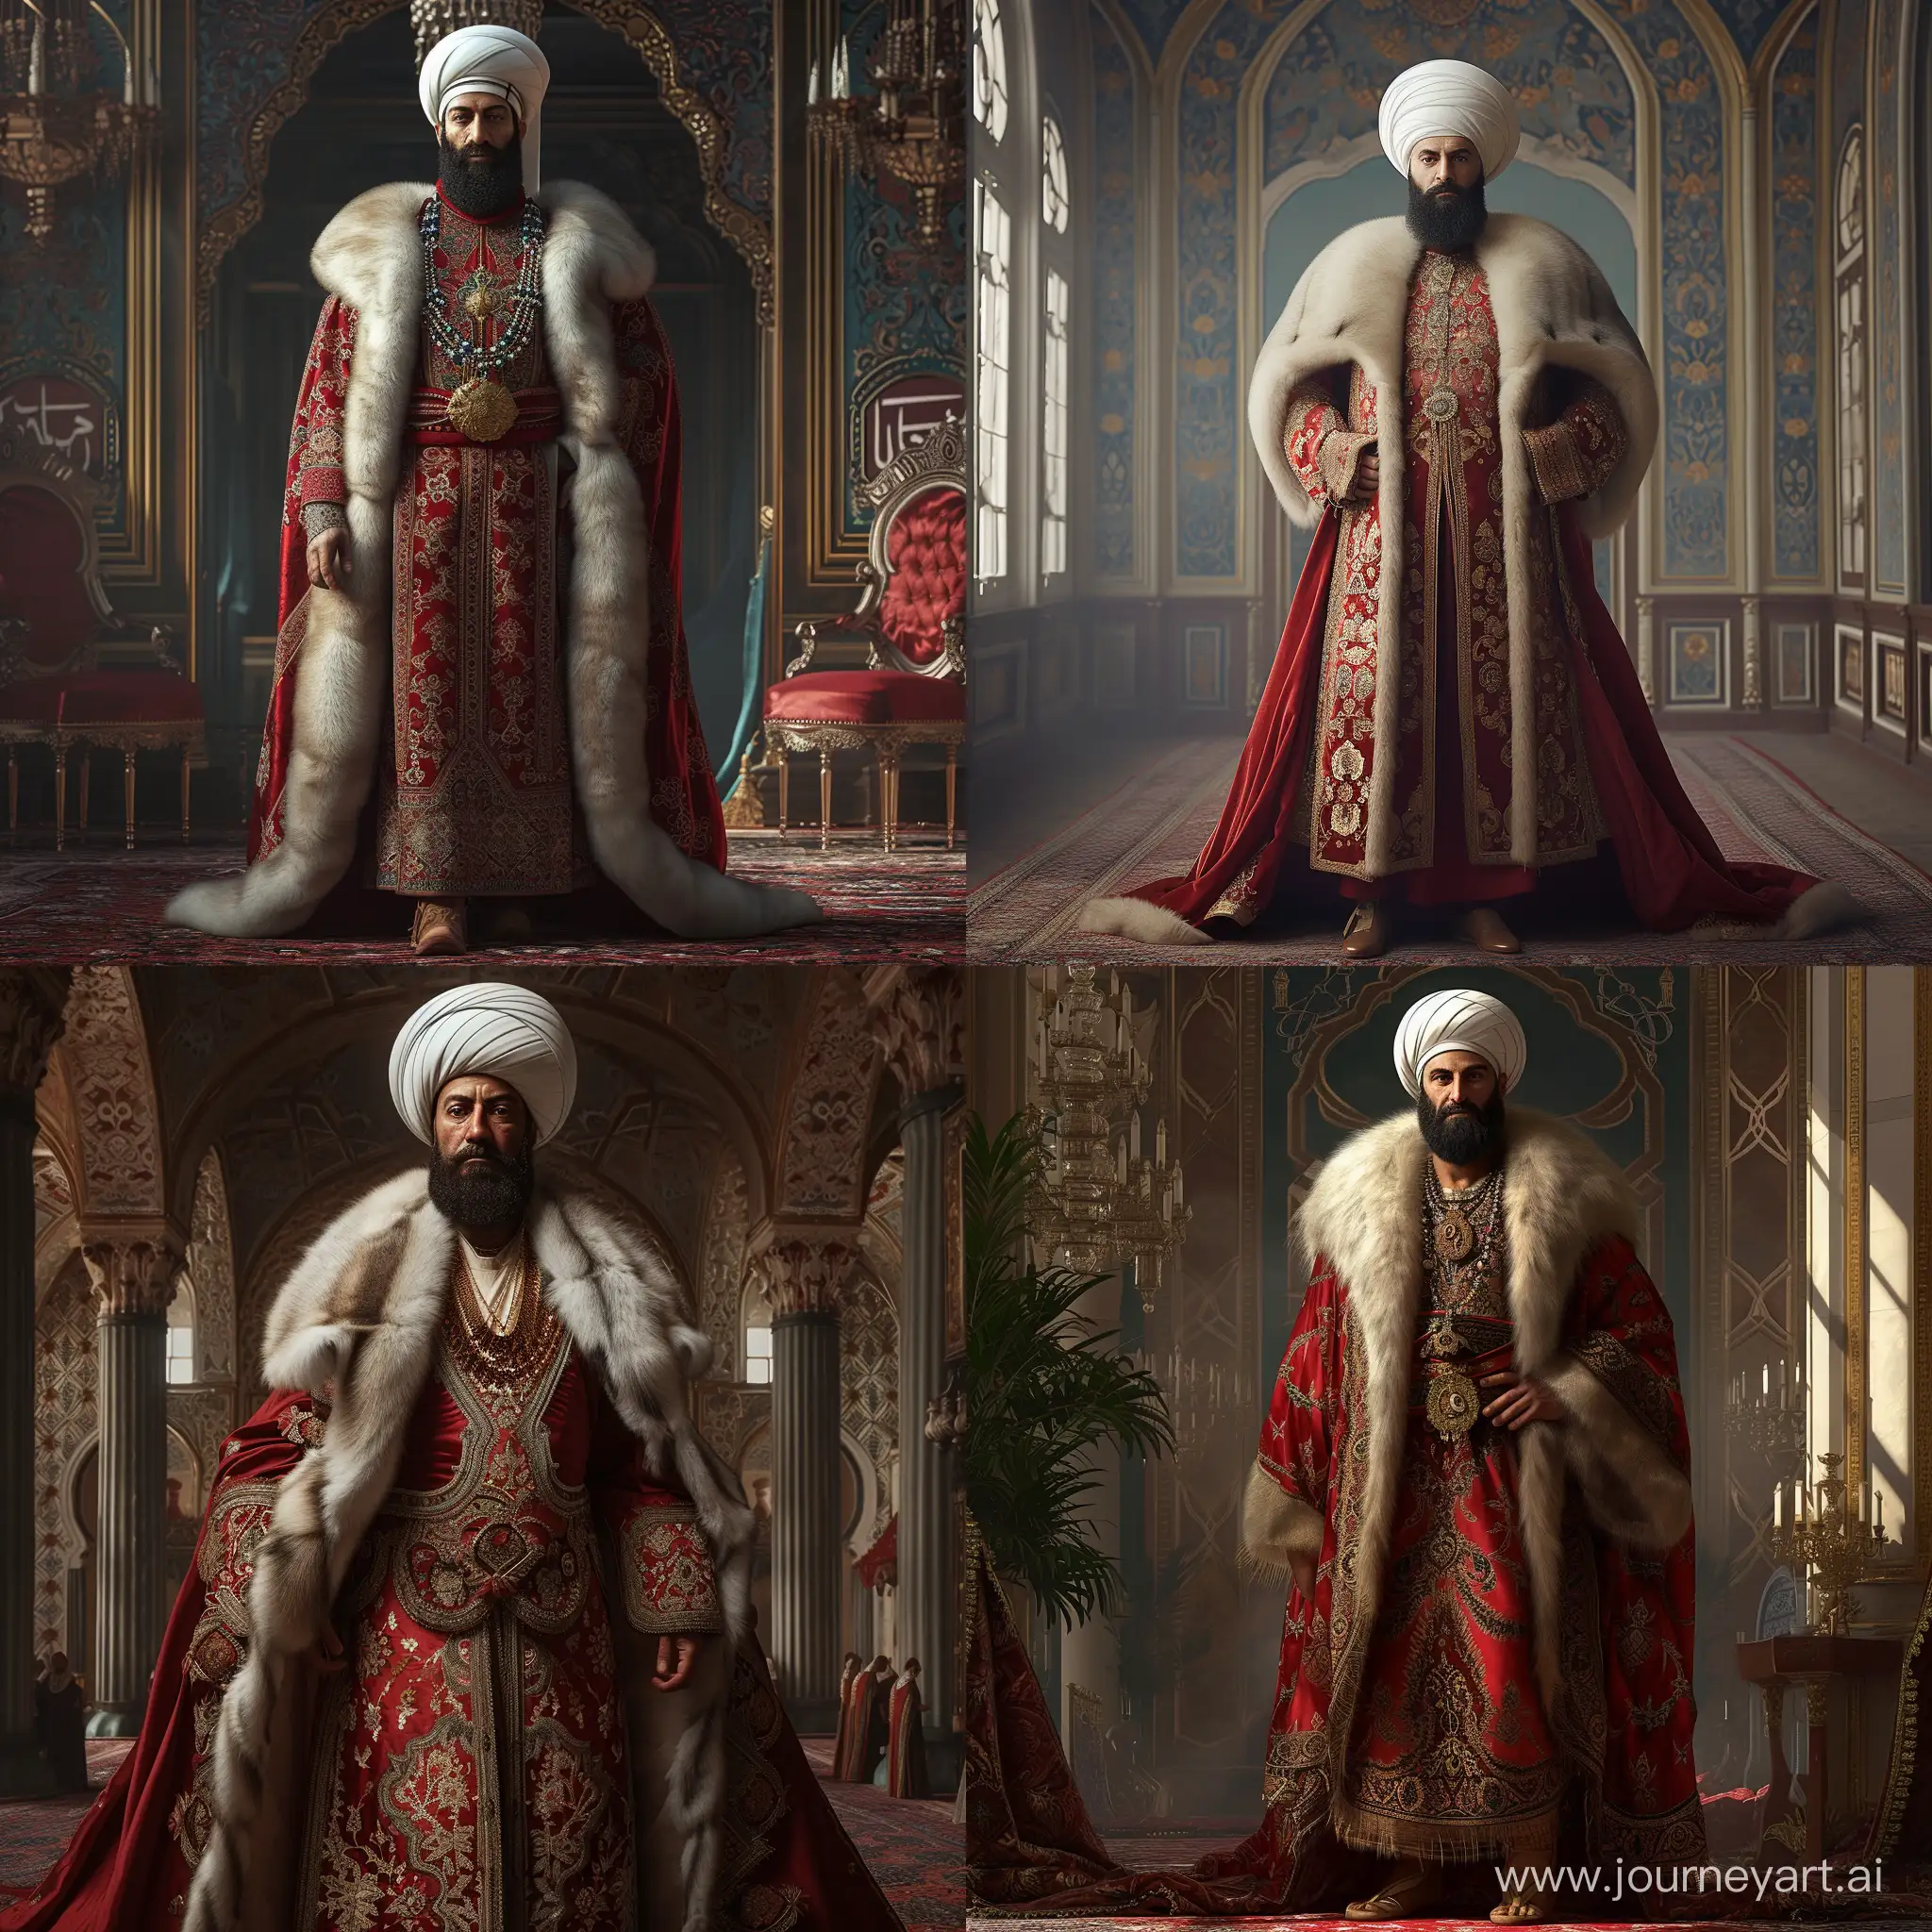 Mehmed-II-24YearOld-Ottoman-Sultan-in-Majestic-Attire-and-Palace